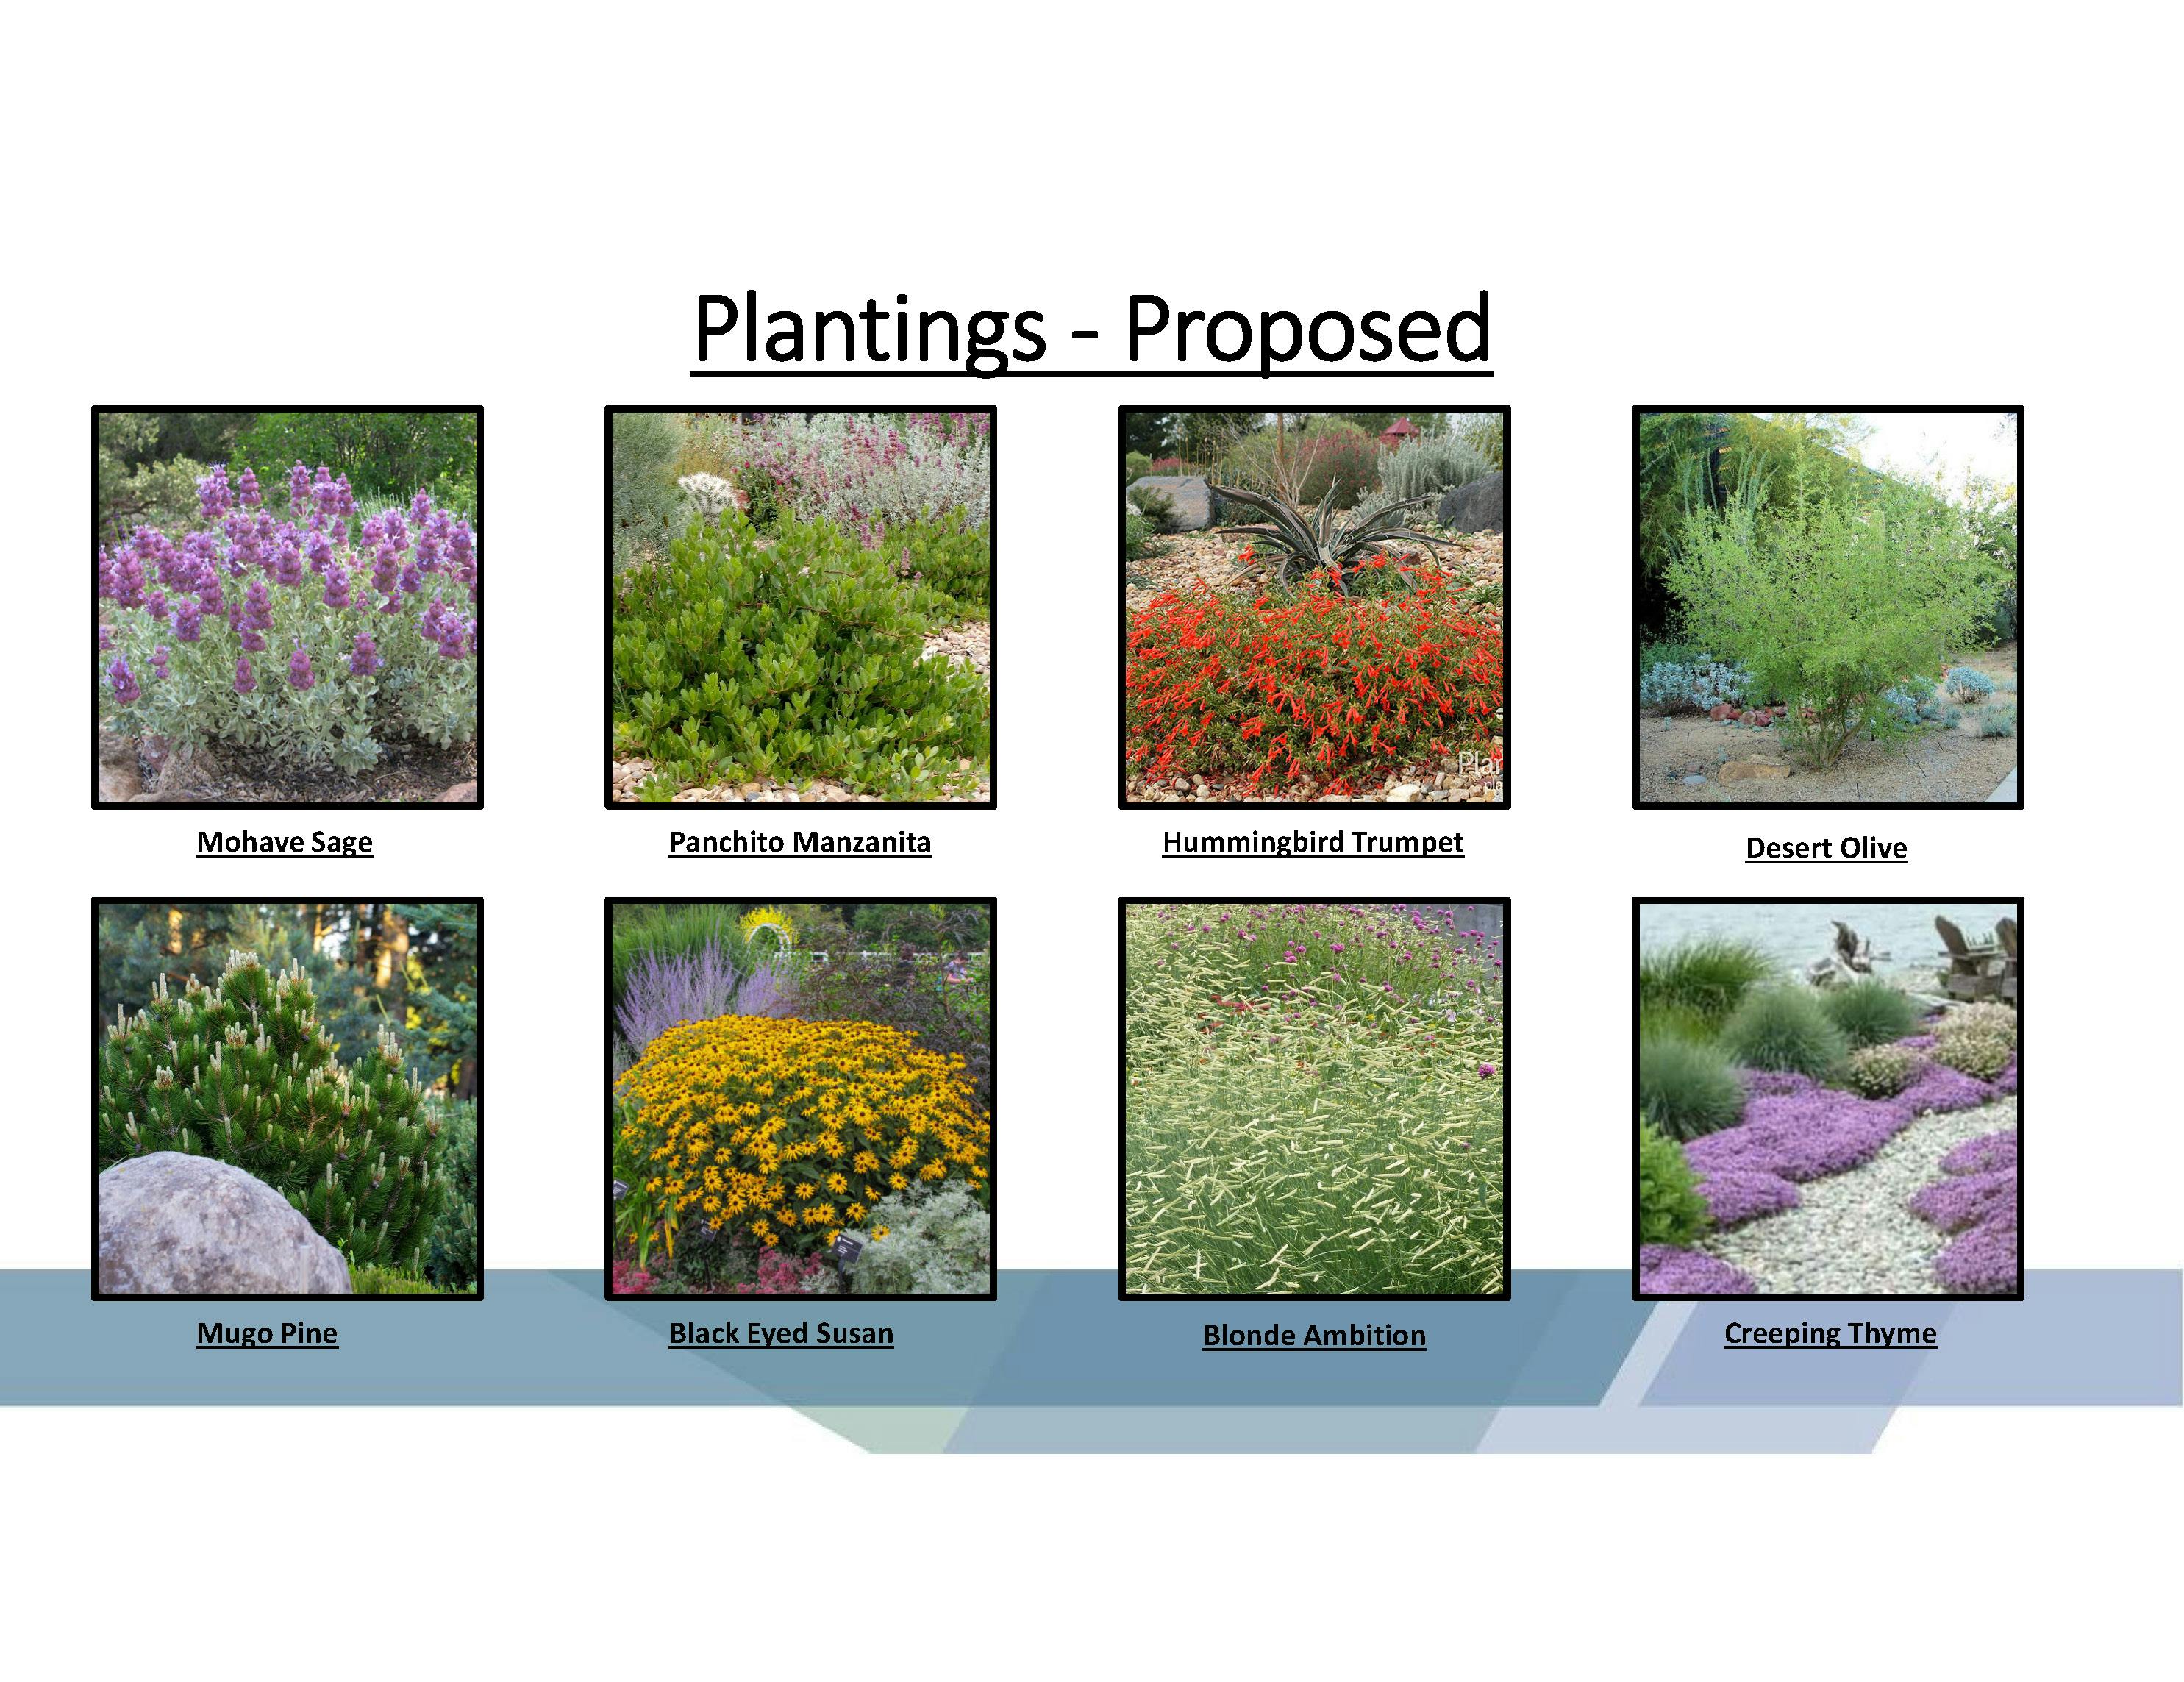 Proposed Plantings